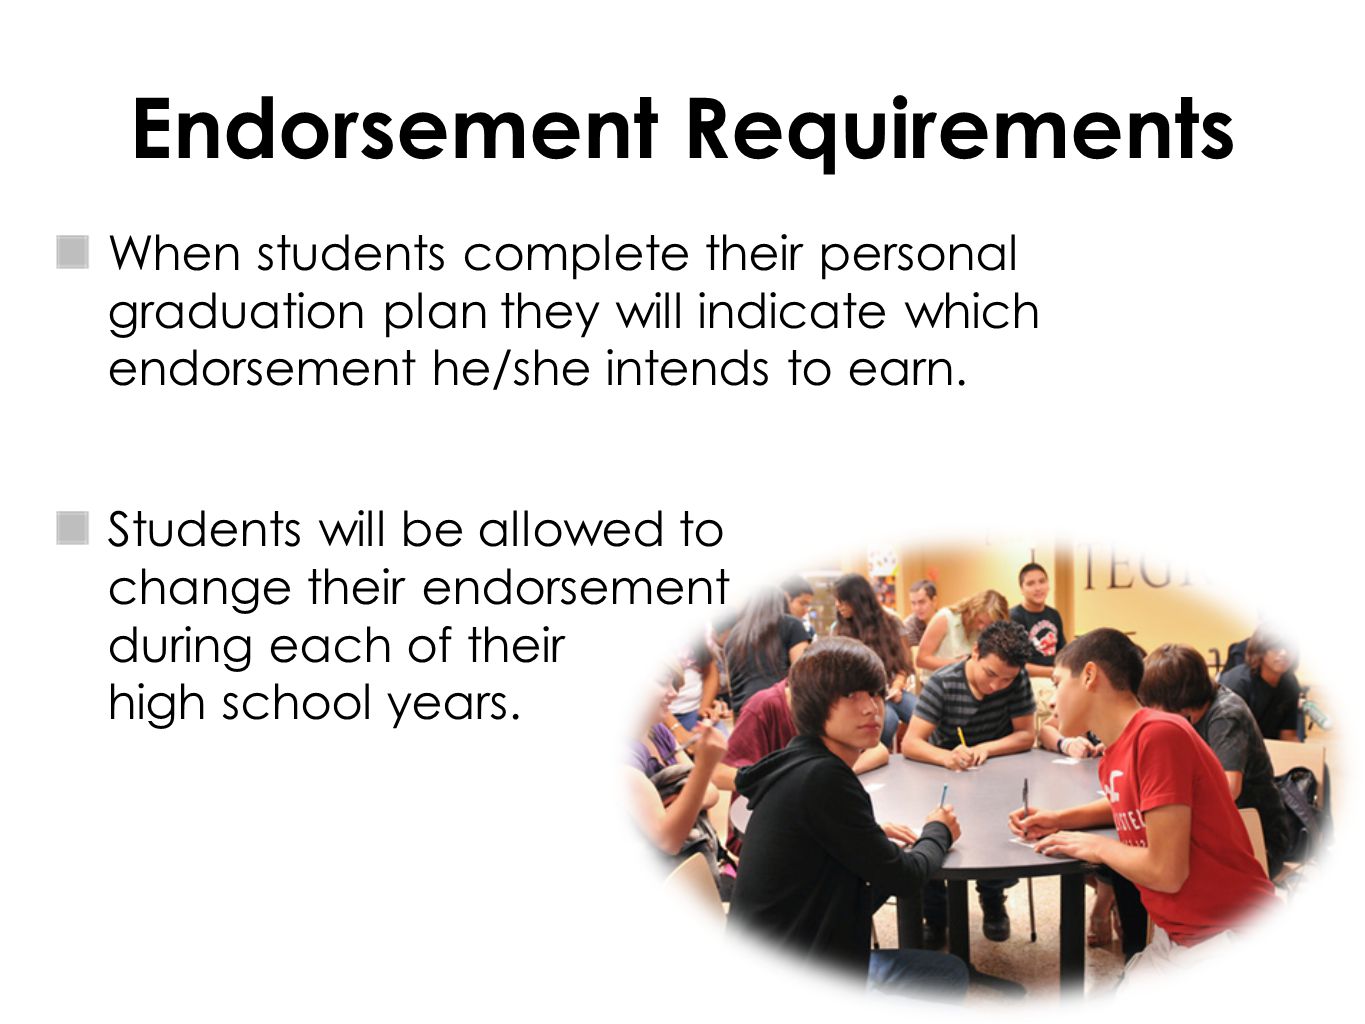 Endorsement Requirements When students complete their personal graduation plan they will indicate which endorsement he/she intends to earn.